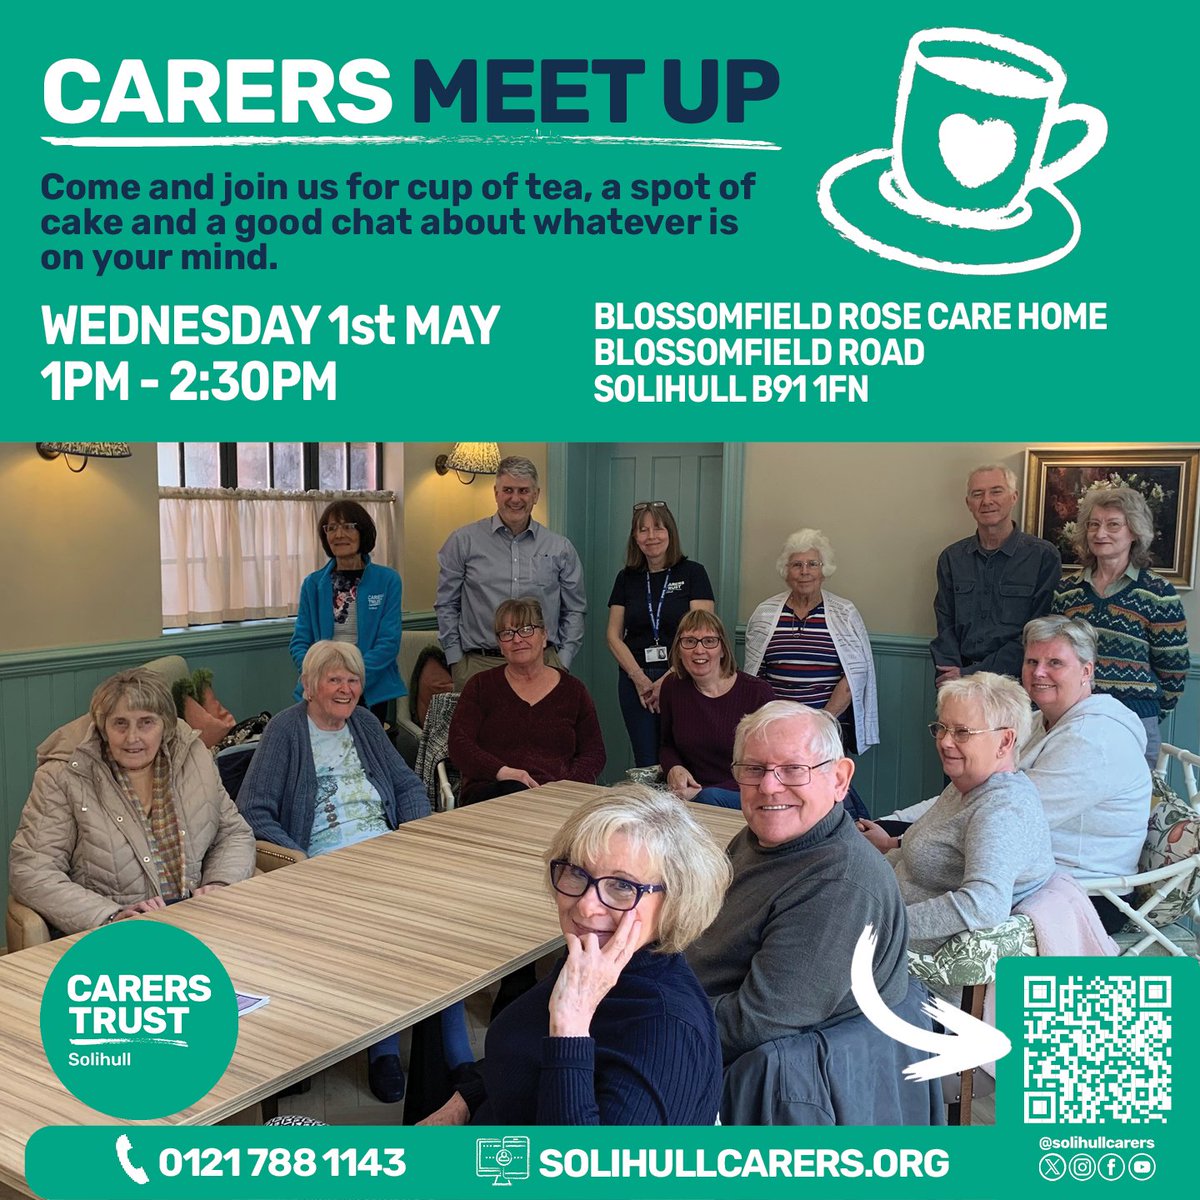 Our friends at Blossomfield Rose are once again hosting an #adultcarers meetup! Come and enjoy the beautiful grounds and gardens with other #unpaidcarers. Join in Wednesday 1st May, 1PM - 2.30PM at Blossomfield Rose, B91 1FN. Register your interest buff.ly/3w9aupY